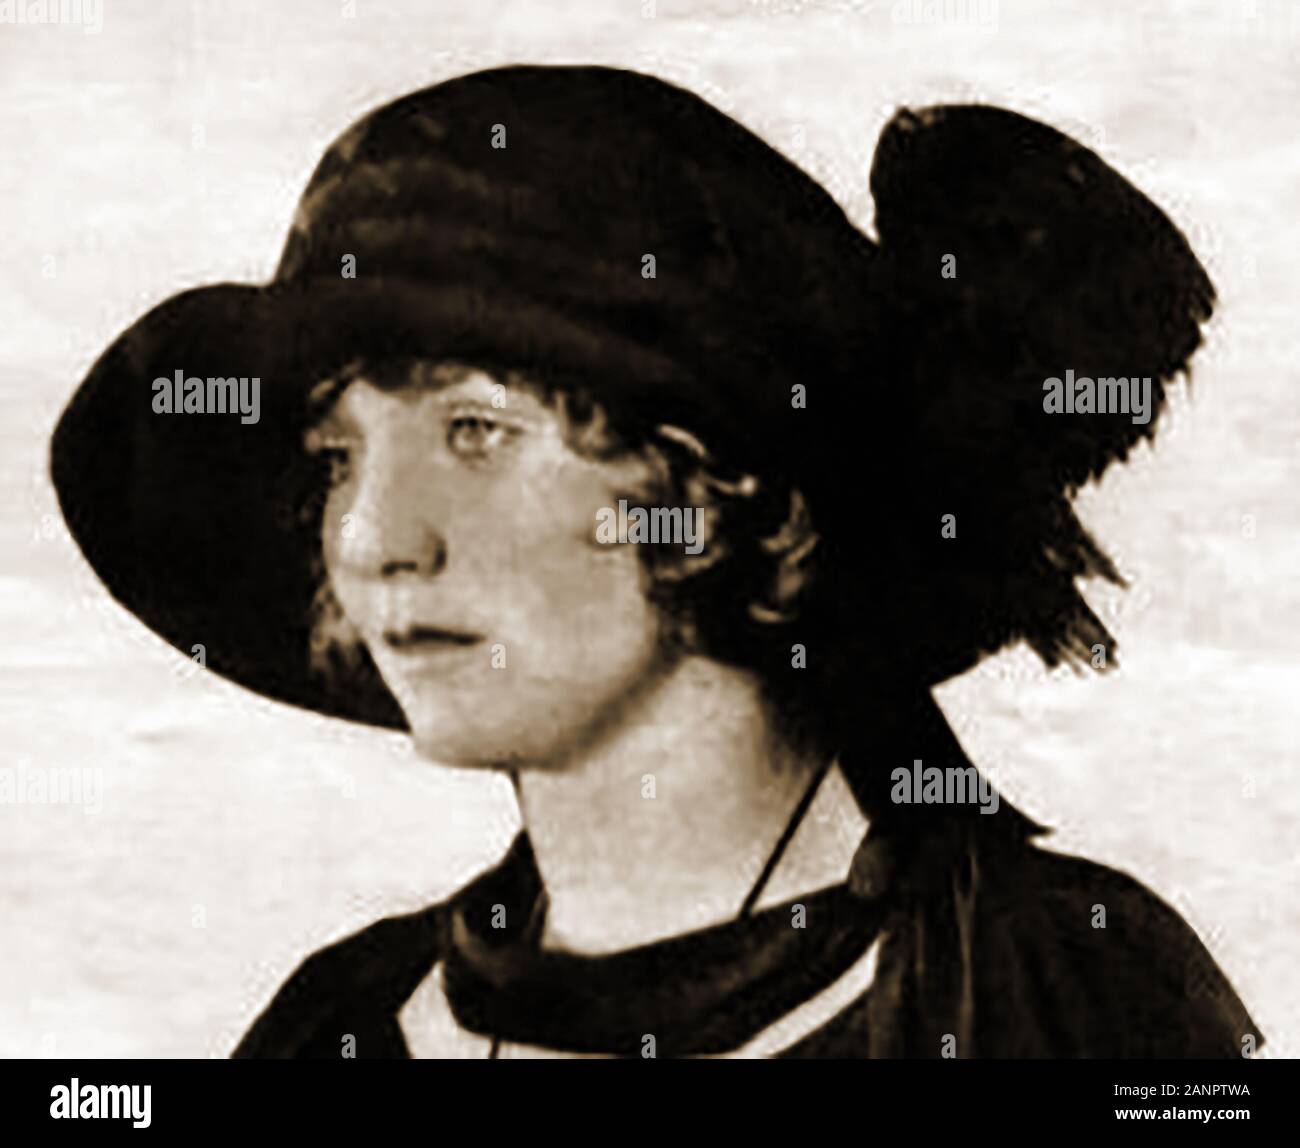 The 1926 murder of Hollywood film director William Tayler- A portrait of Mary Miles Minter, a former child star and teen screen idol who was linked romantically to W D  Tayler,  (born William Cunningham Deane-Tanner  1872 –  1922)  movie director and actor murdered in his home 1922, causing one of Hollywood's greatest scandals. He was  an Anglo-Irish-American director and actor during the silent film era. A mysterious  doctor declared he died of a stomach hemorrhage. A small bullet wound was later found in his back.The  case was never solved despite a large number of witnesses & suspects. Stock Photo